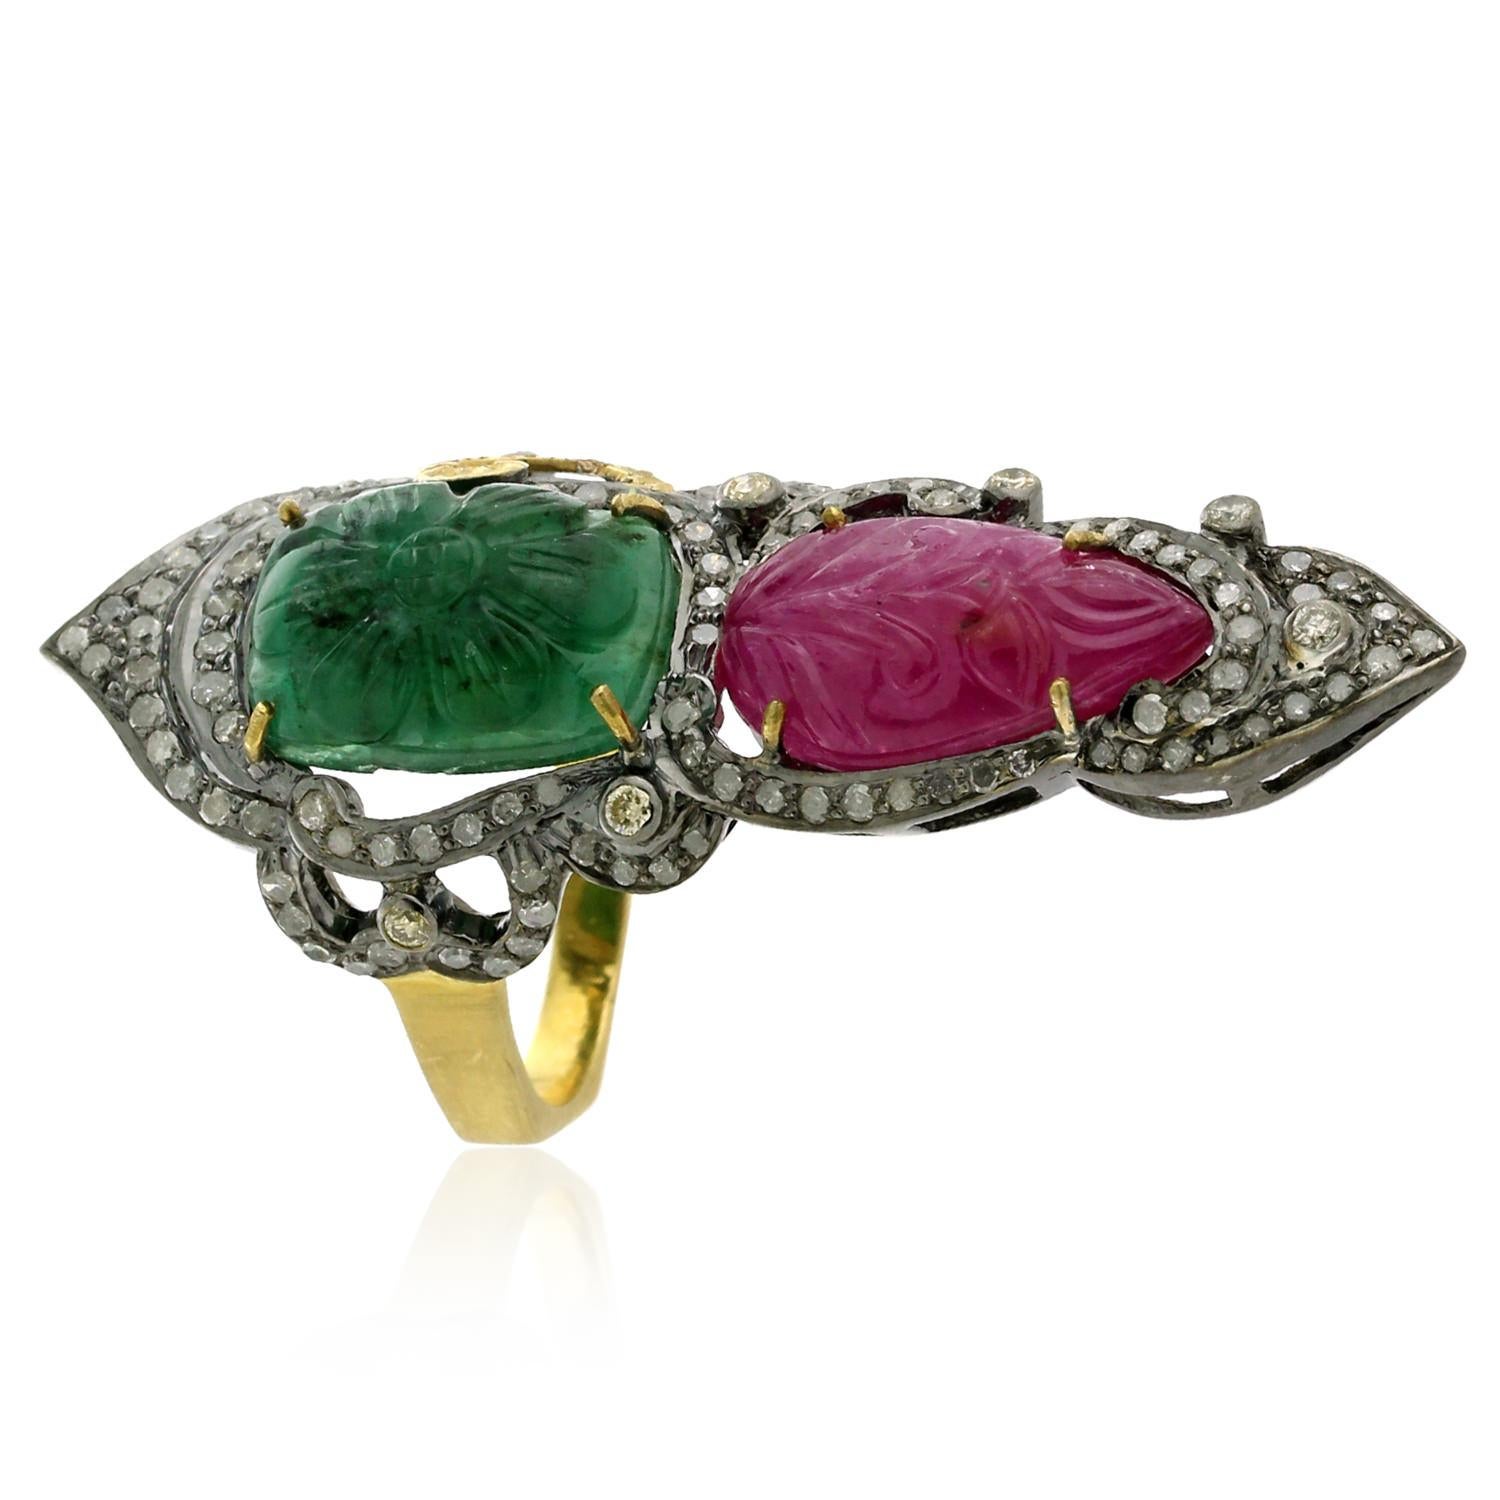 One of a Kind this Designer Hand Craved Ruby, Emerald Ring with Diamonds in Gold and Silver is lovely for any occasion.

Ring Size: 7 ( Can be sized )

18kt Gold:3.39gms
Diamond:1.23cts
Silver:4.51gms
Emerald:6.4cts
Ruby:6.35cts

